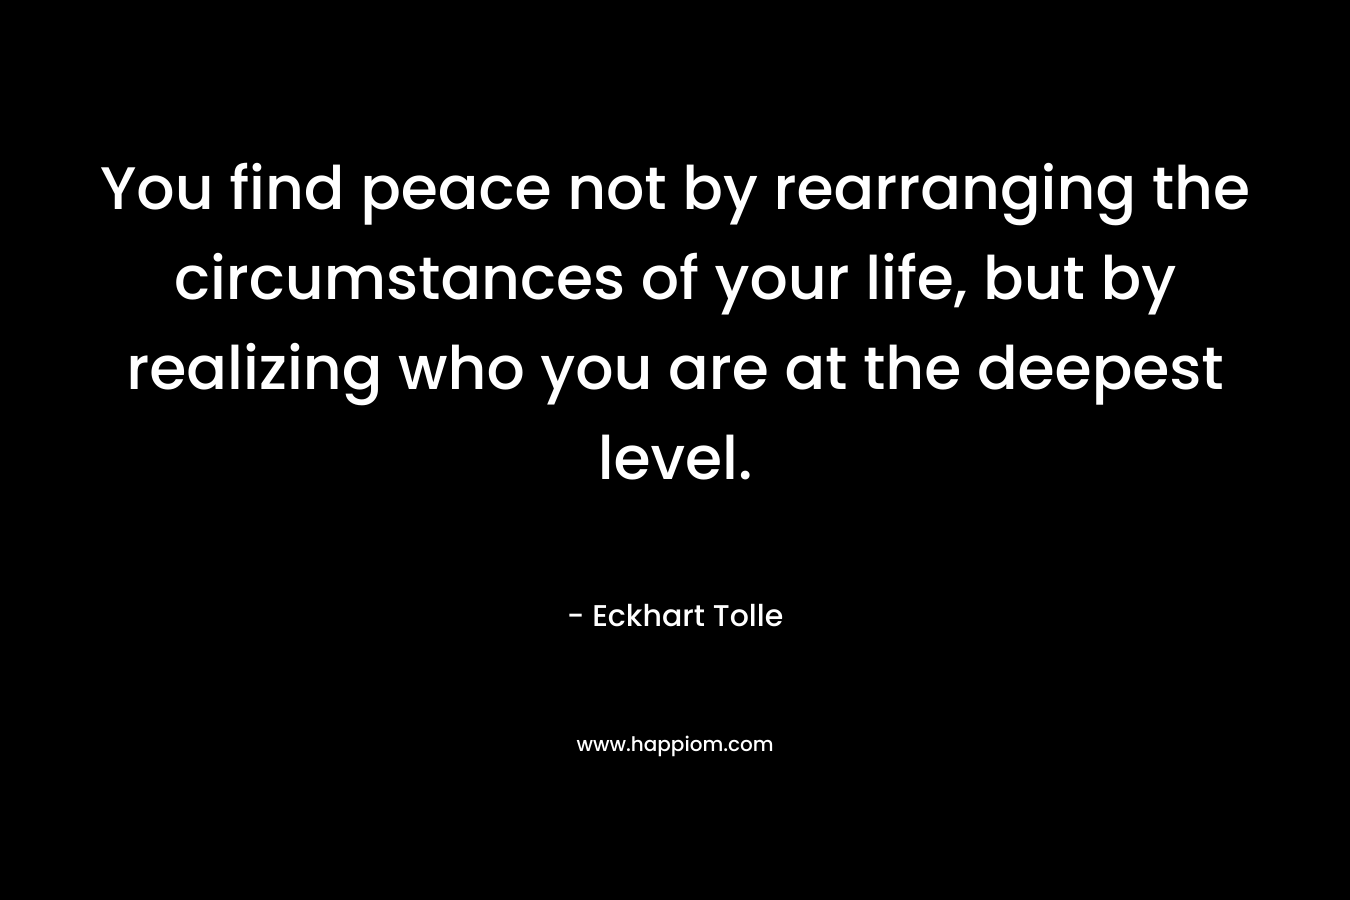 You find peace not by rearranging the circumstances of your life, but by realizing who you are at the deepest level.